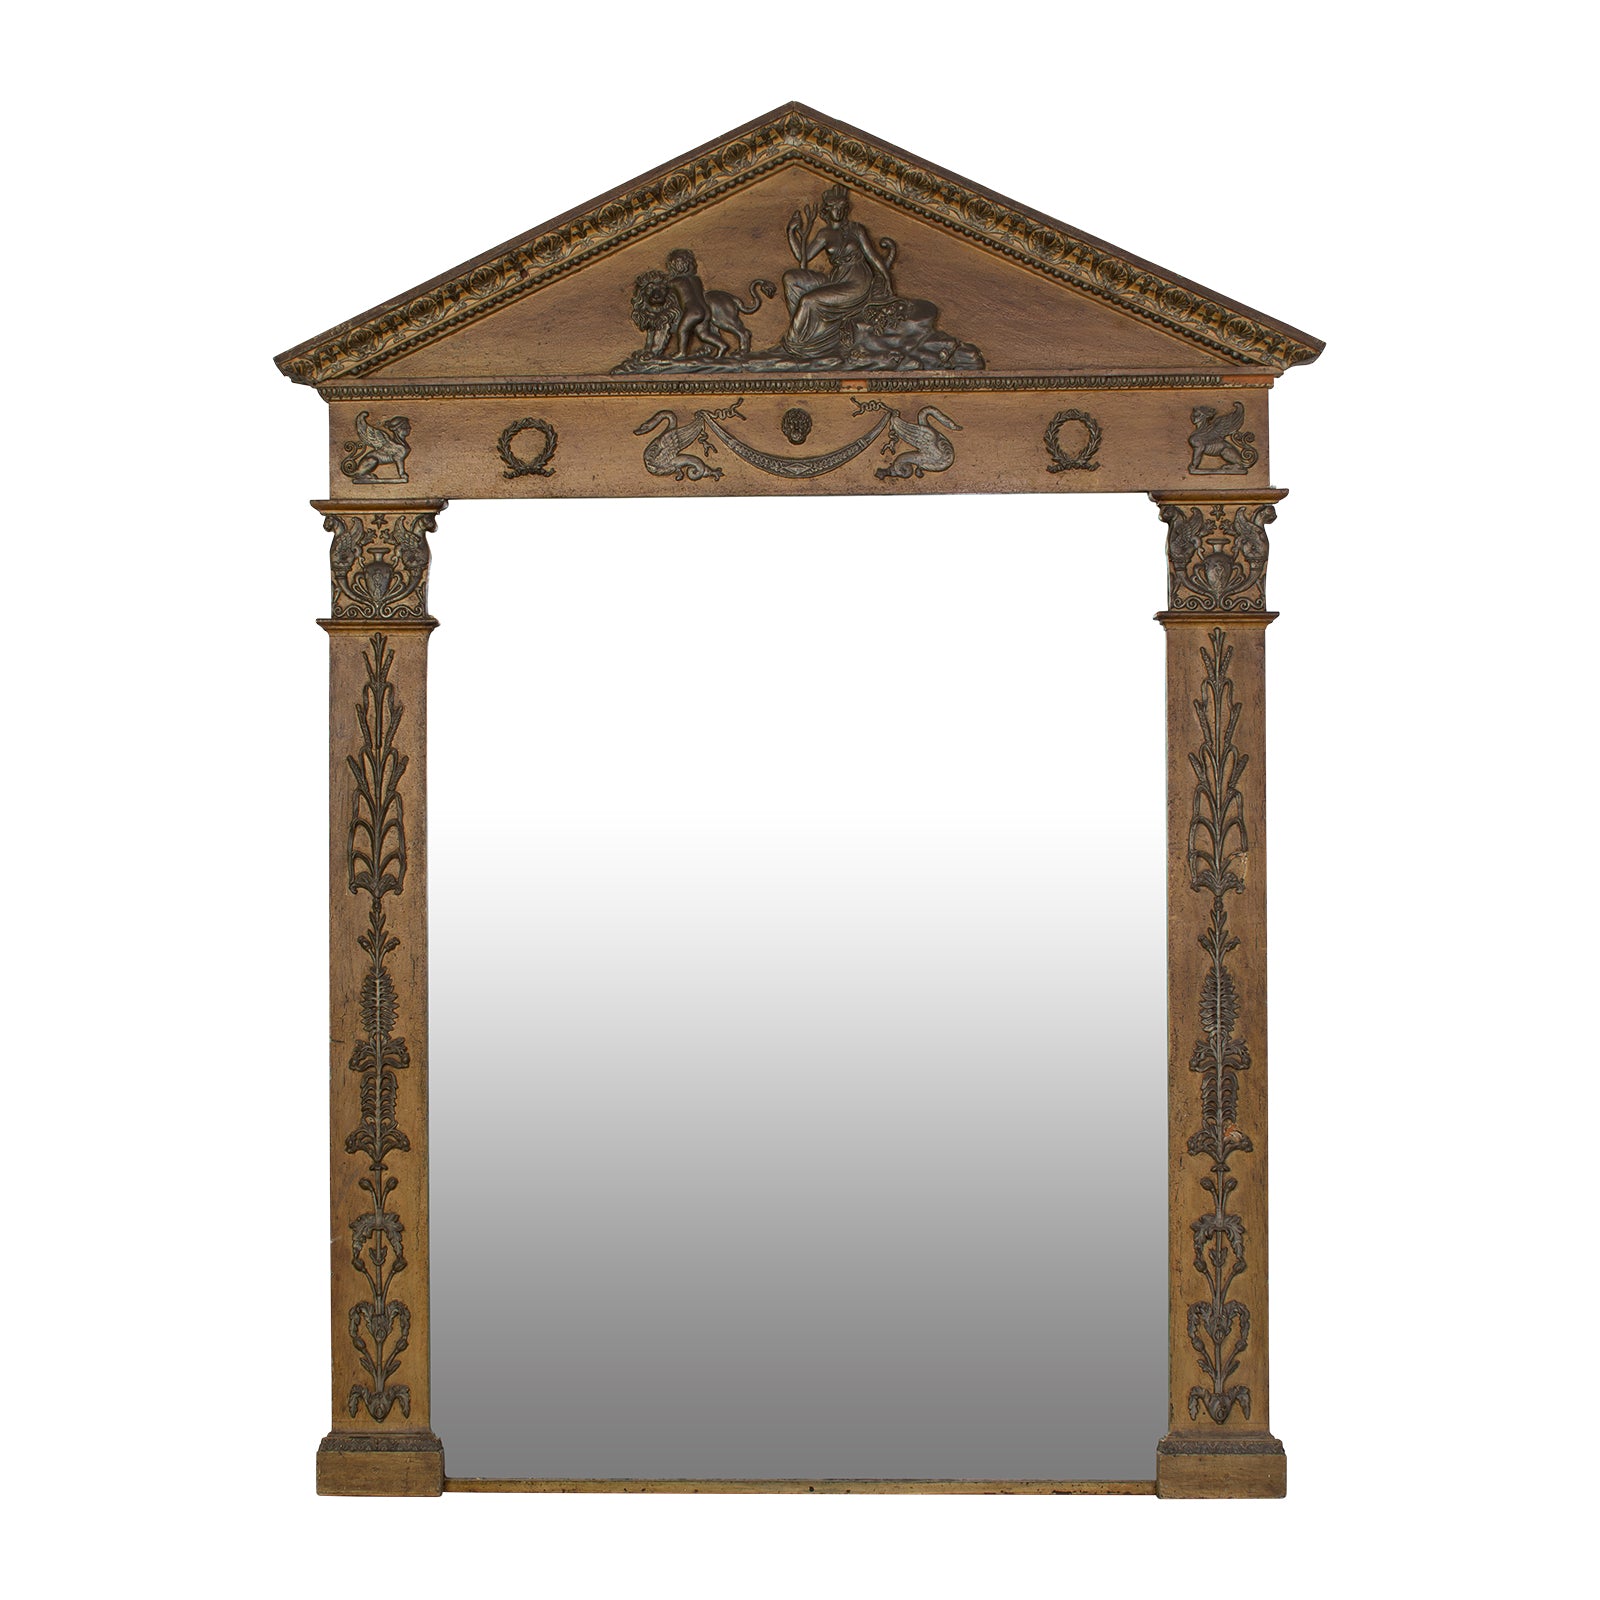 A Large Empire Style Mirror with Triangular Pediment